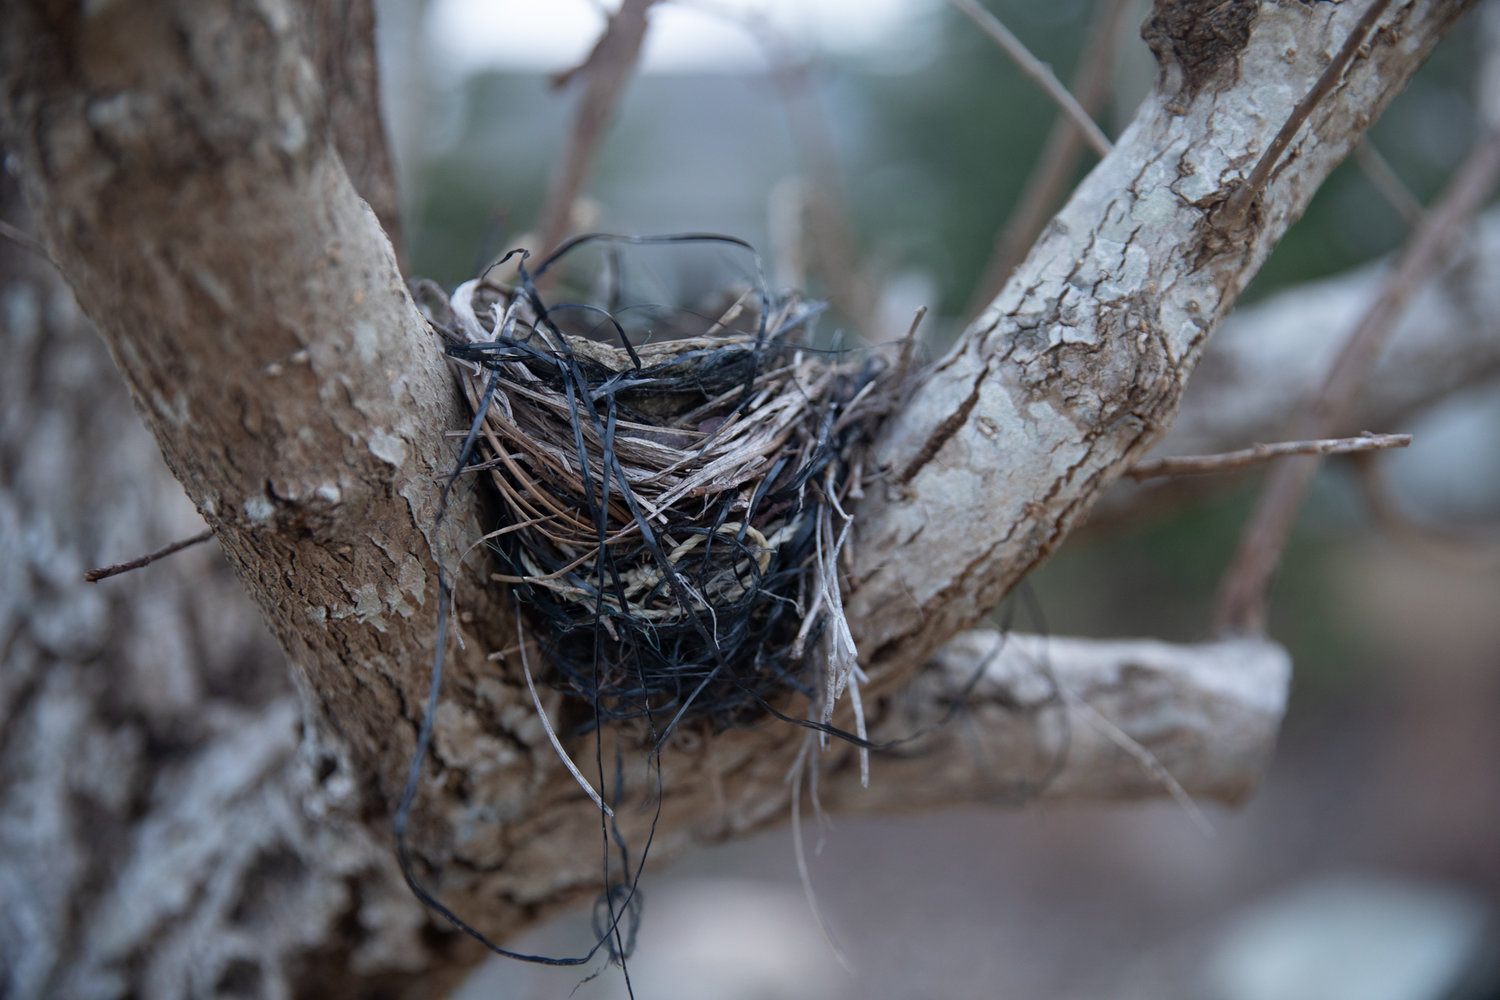 A bird's nest made of string and plastic rests in a tree behind Maclean's house on Sunday, Feb. 19, 2023.